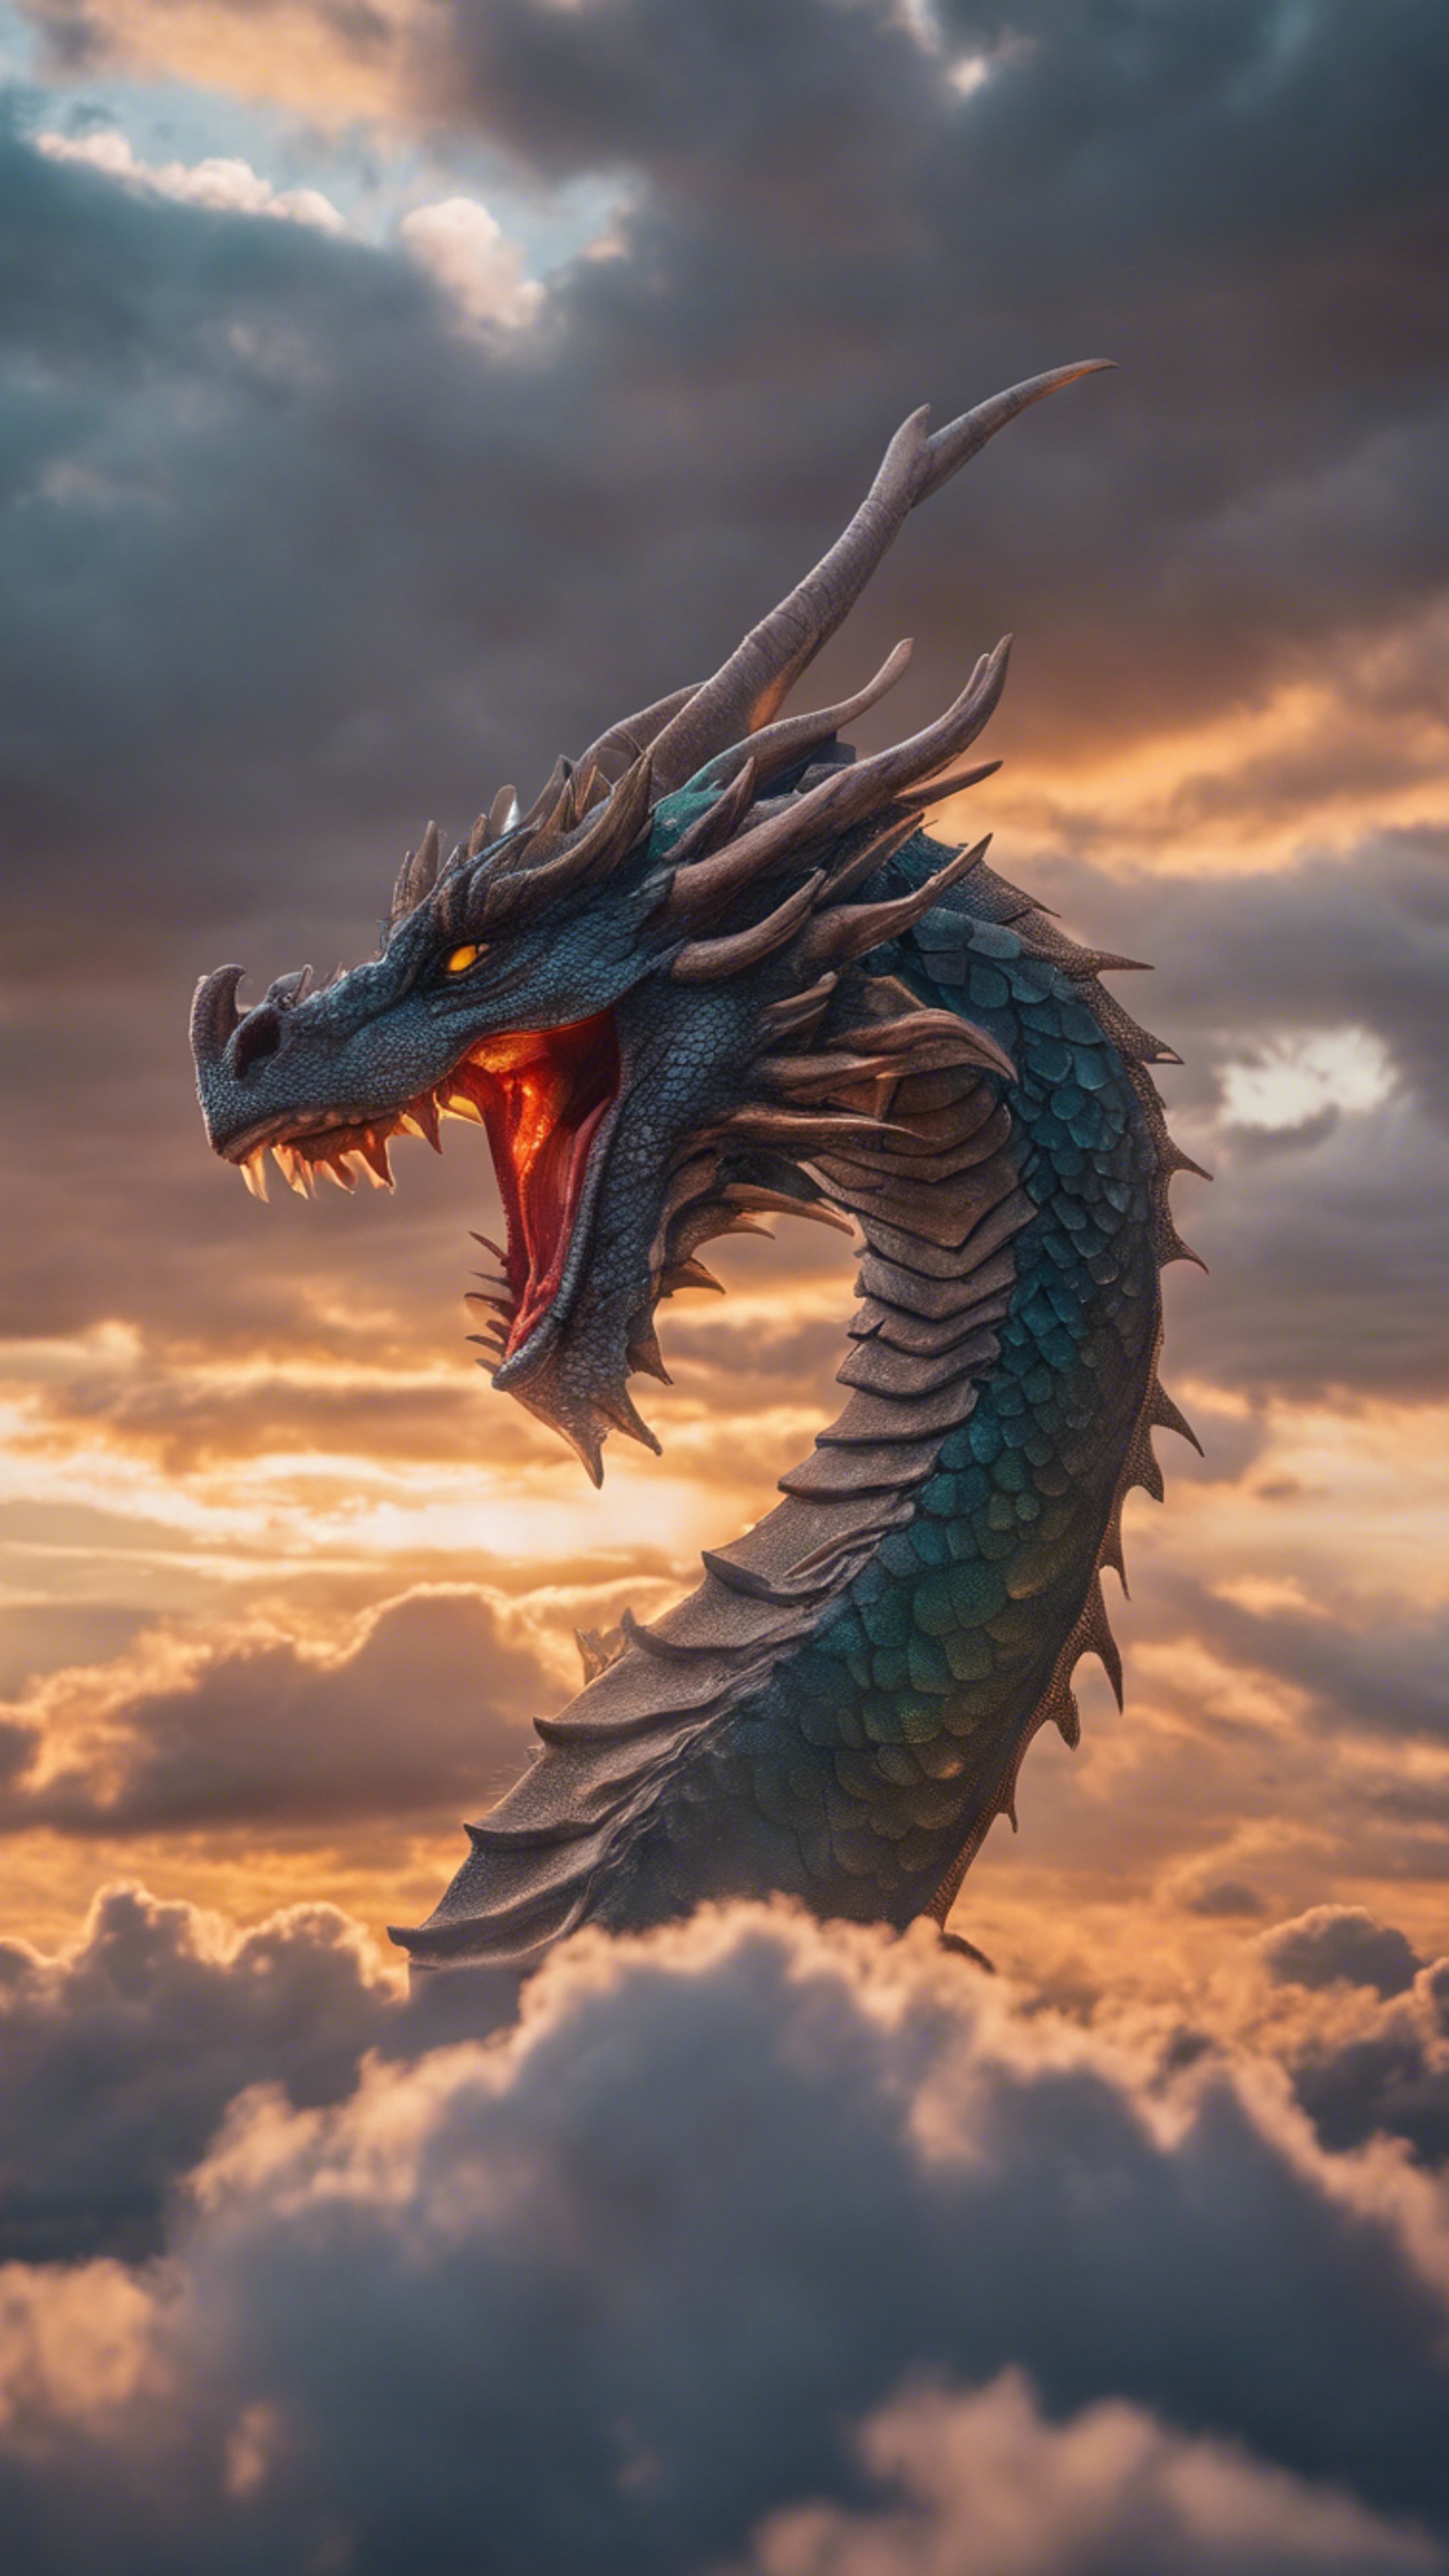 A dragon of pure light breaking through the clouds as the sun sets, its scales reflecting the vibrant colors of dusk. Hintergrund[43b0d43f7e0c44e88acd]